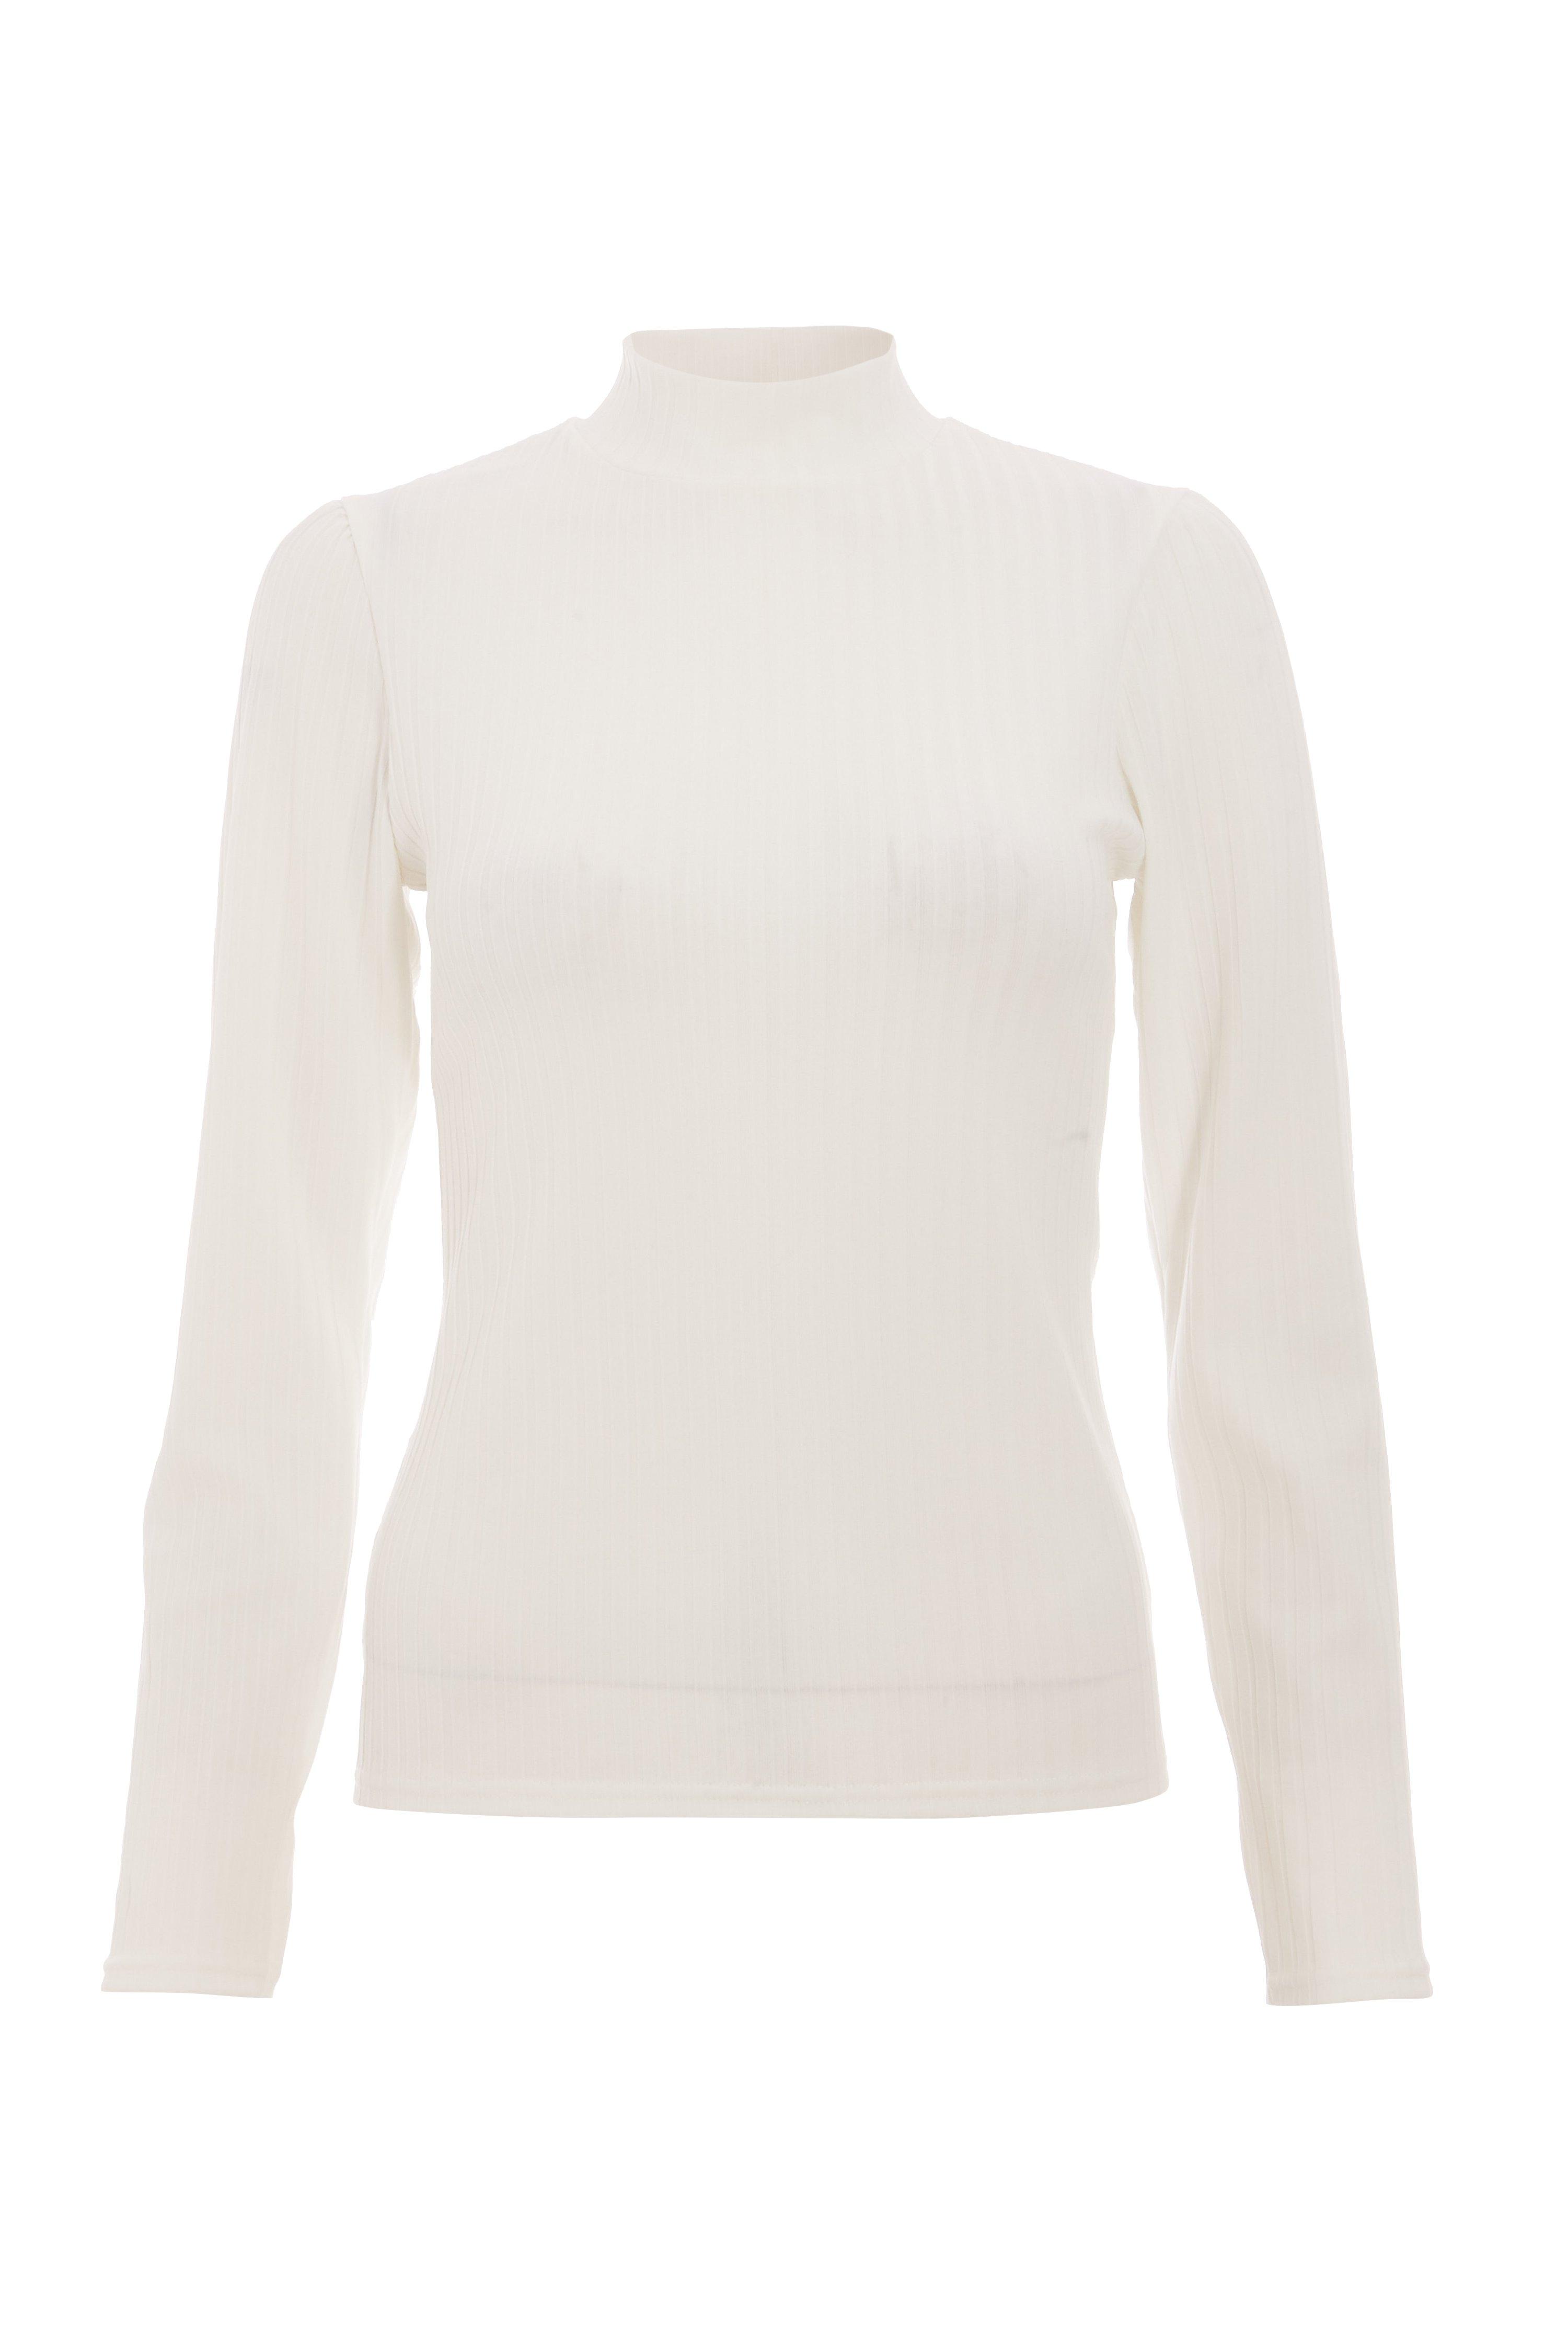 Cream Knit Ribbed Turtle Neck Top - Quiz Clothing